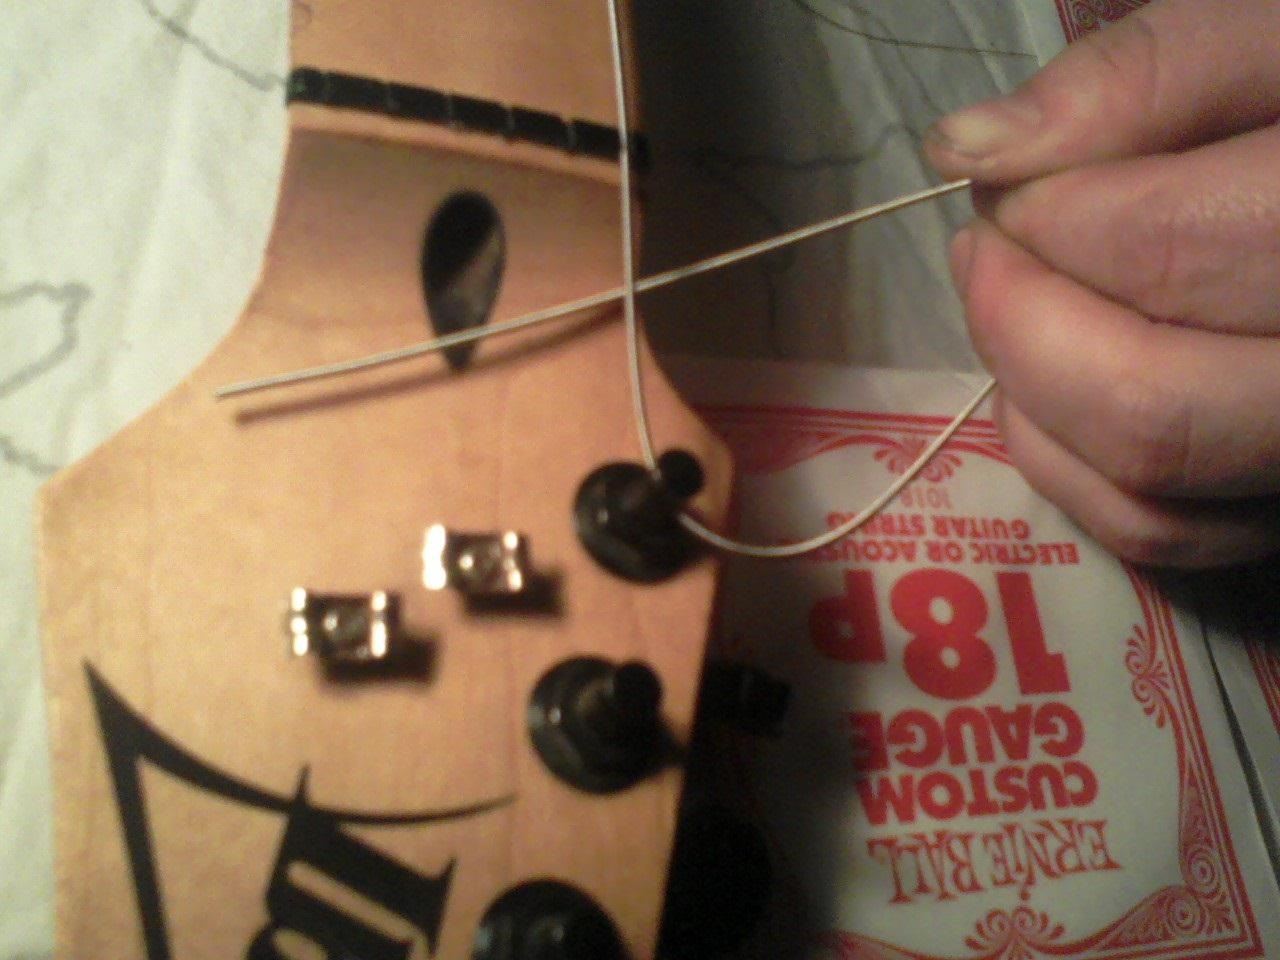 How to Restring & Tune an Electric Guitar